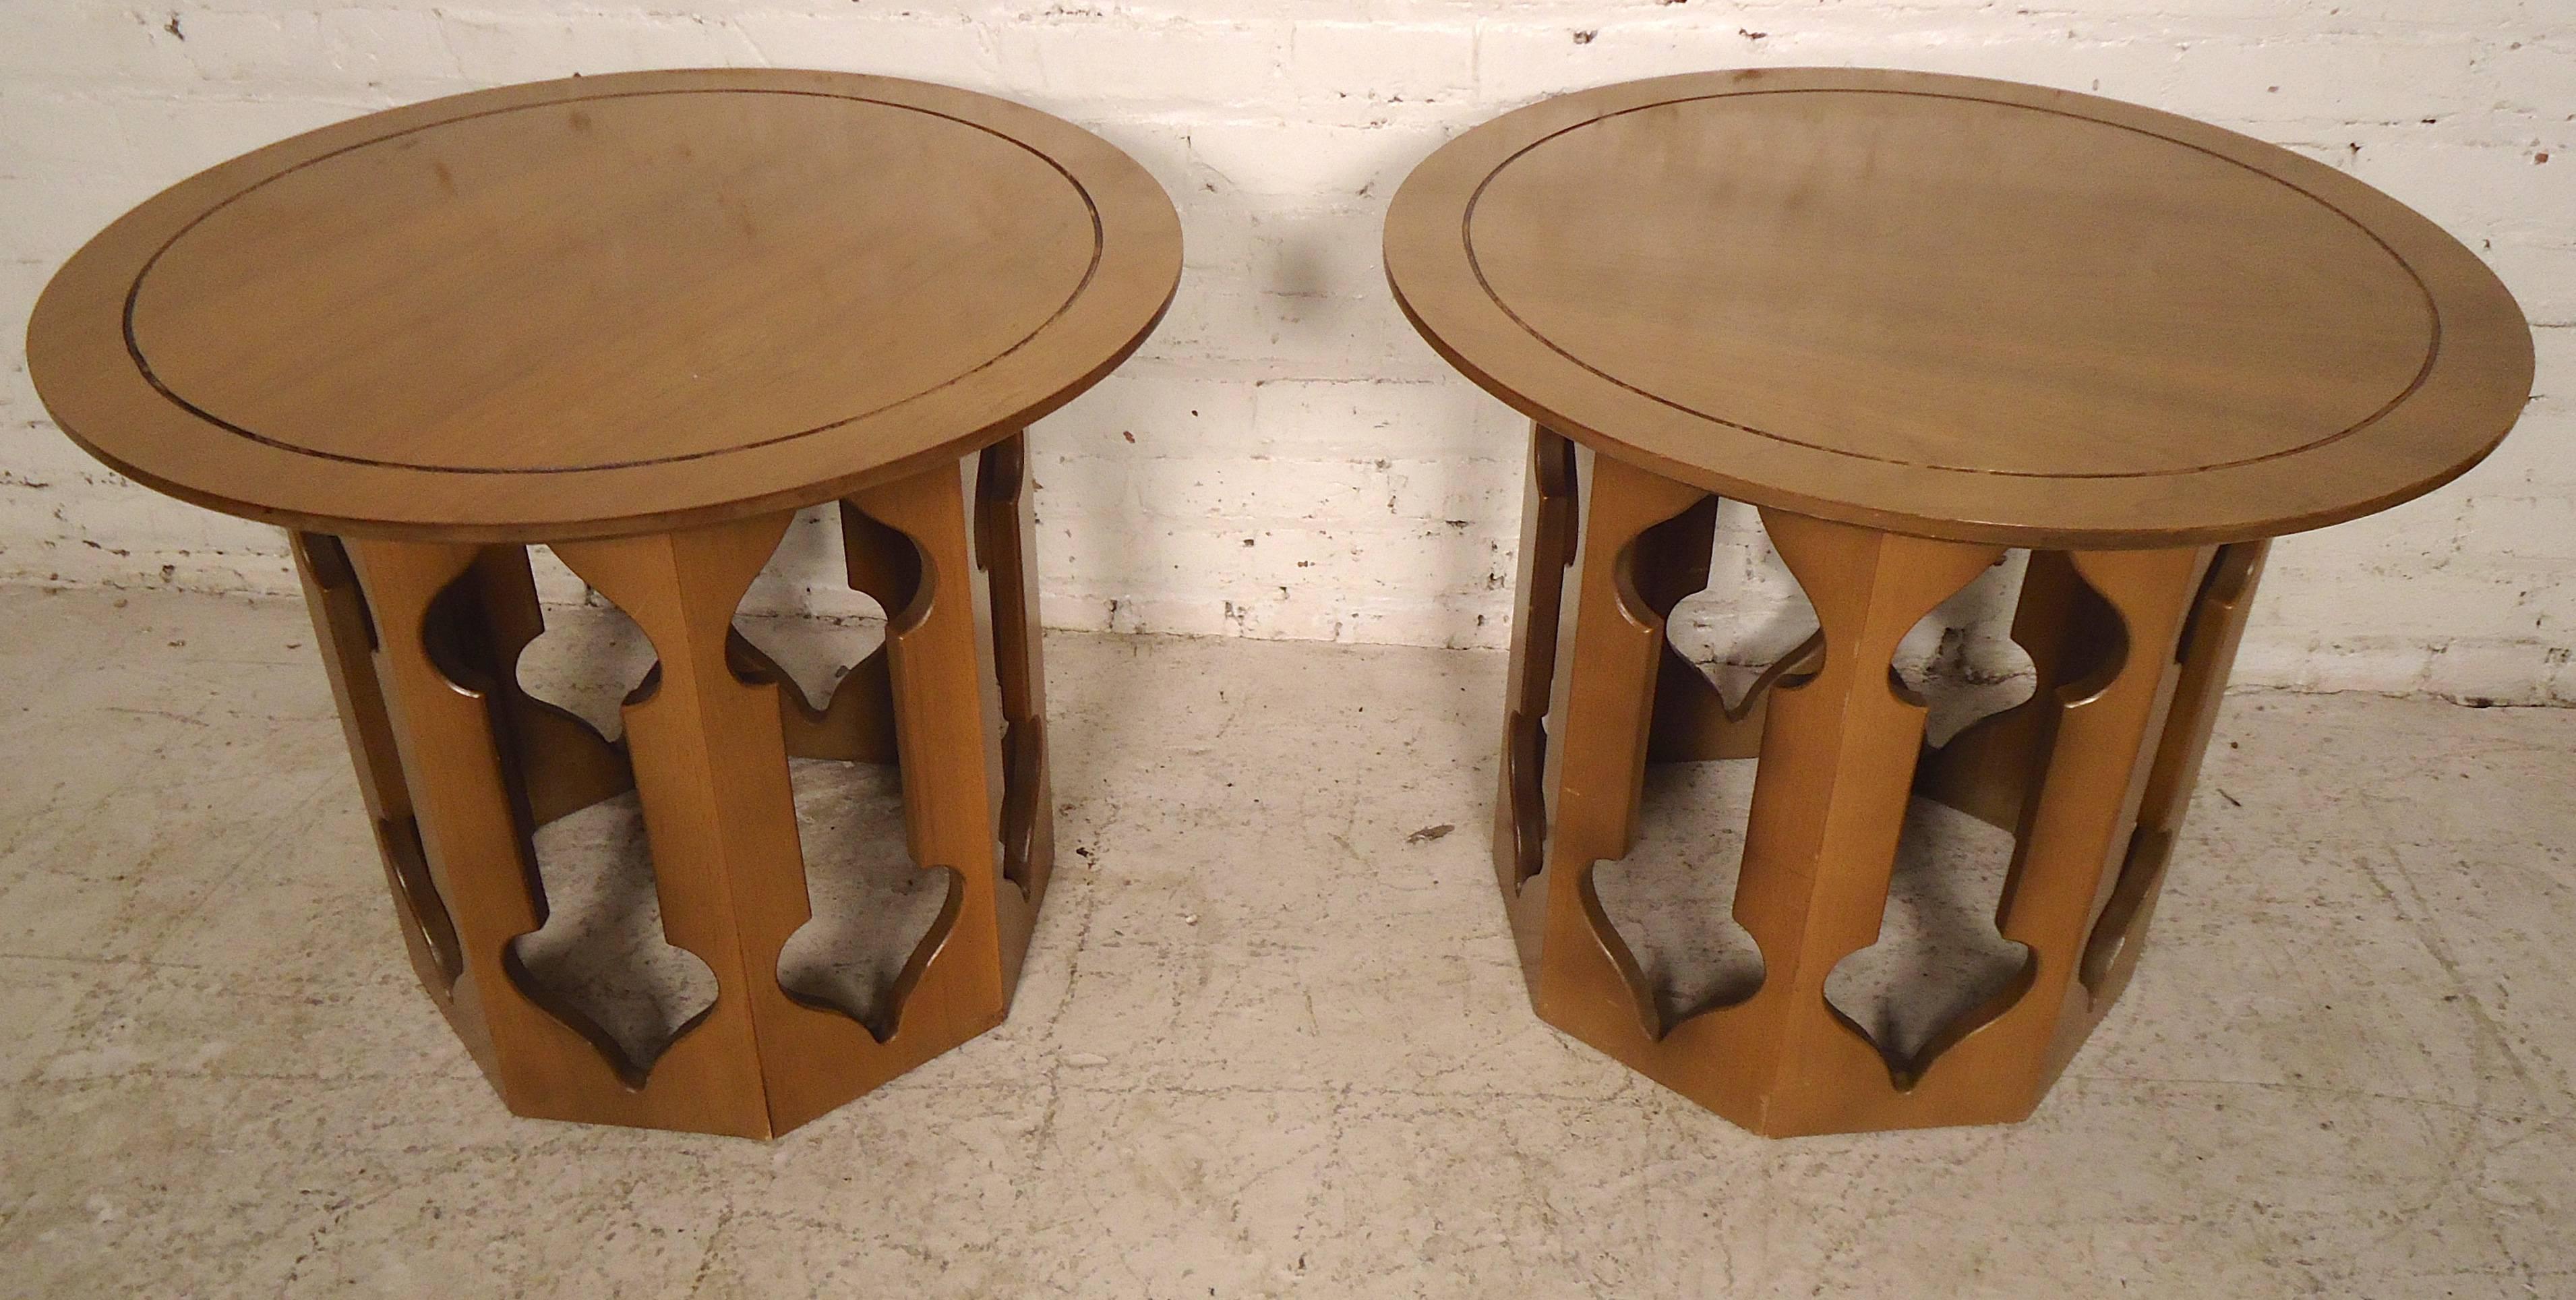 Pair of end tables with round top and sculpted bases in a Harvey Probber style. 

(Please confirm item location - NY or NJ - with dealer).
 